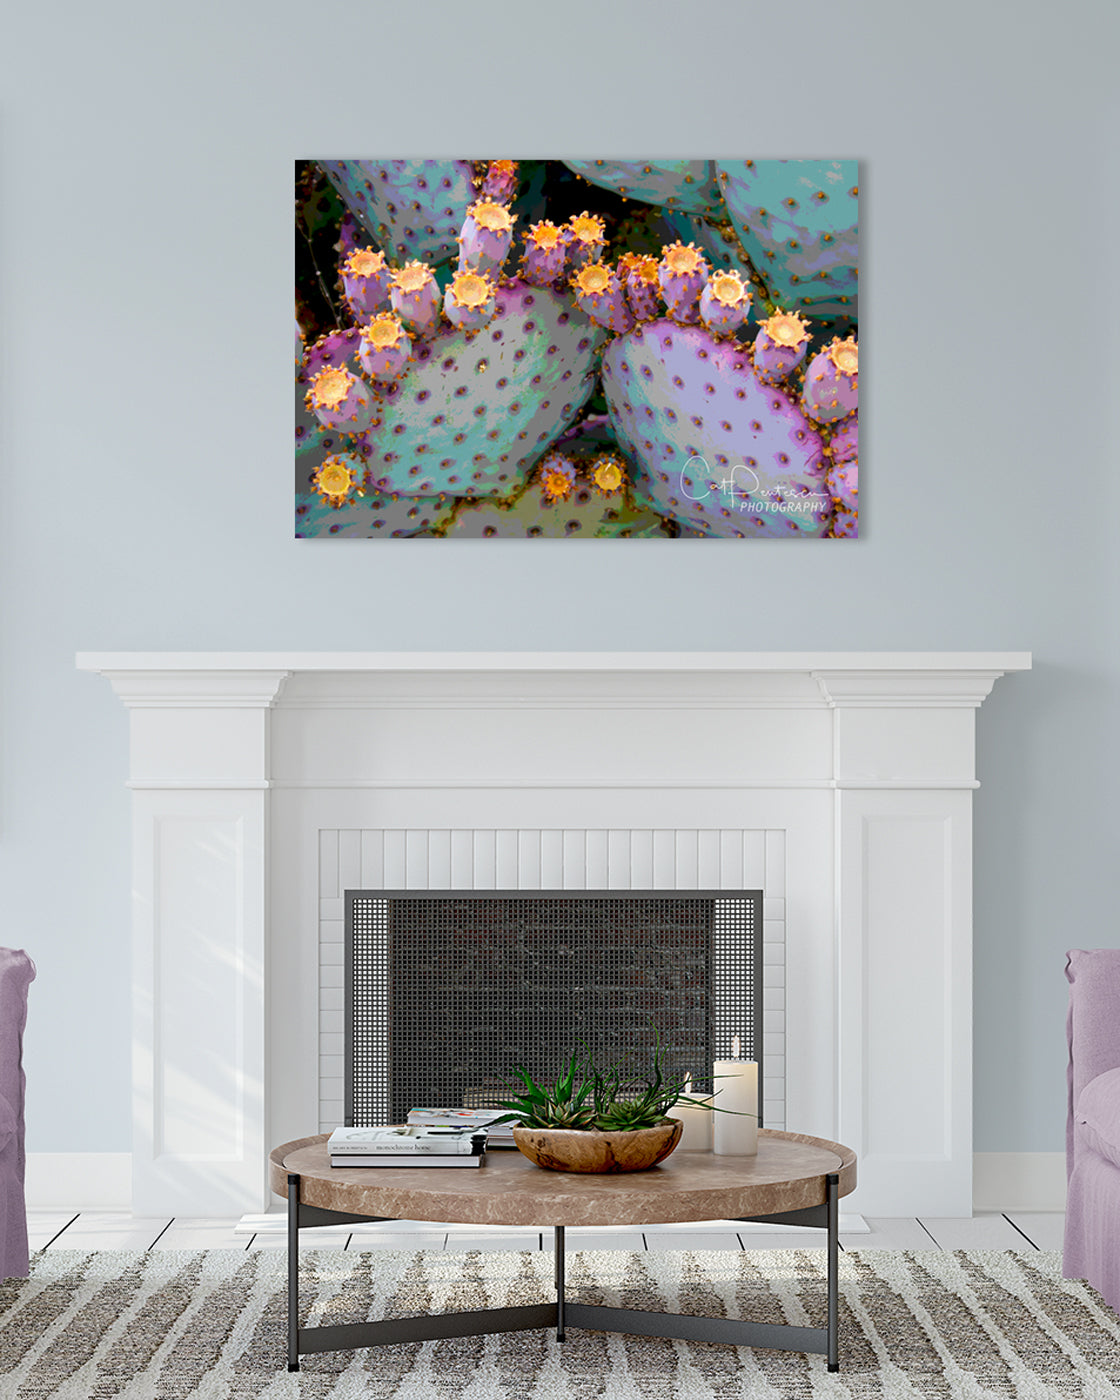 Artistic image of colorful cactus plant over fireplace